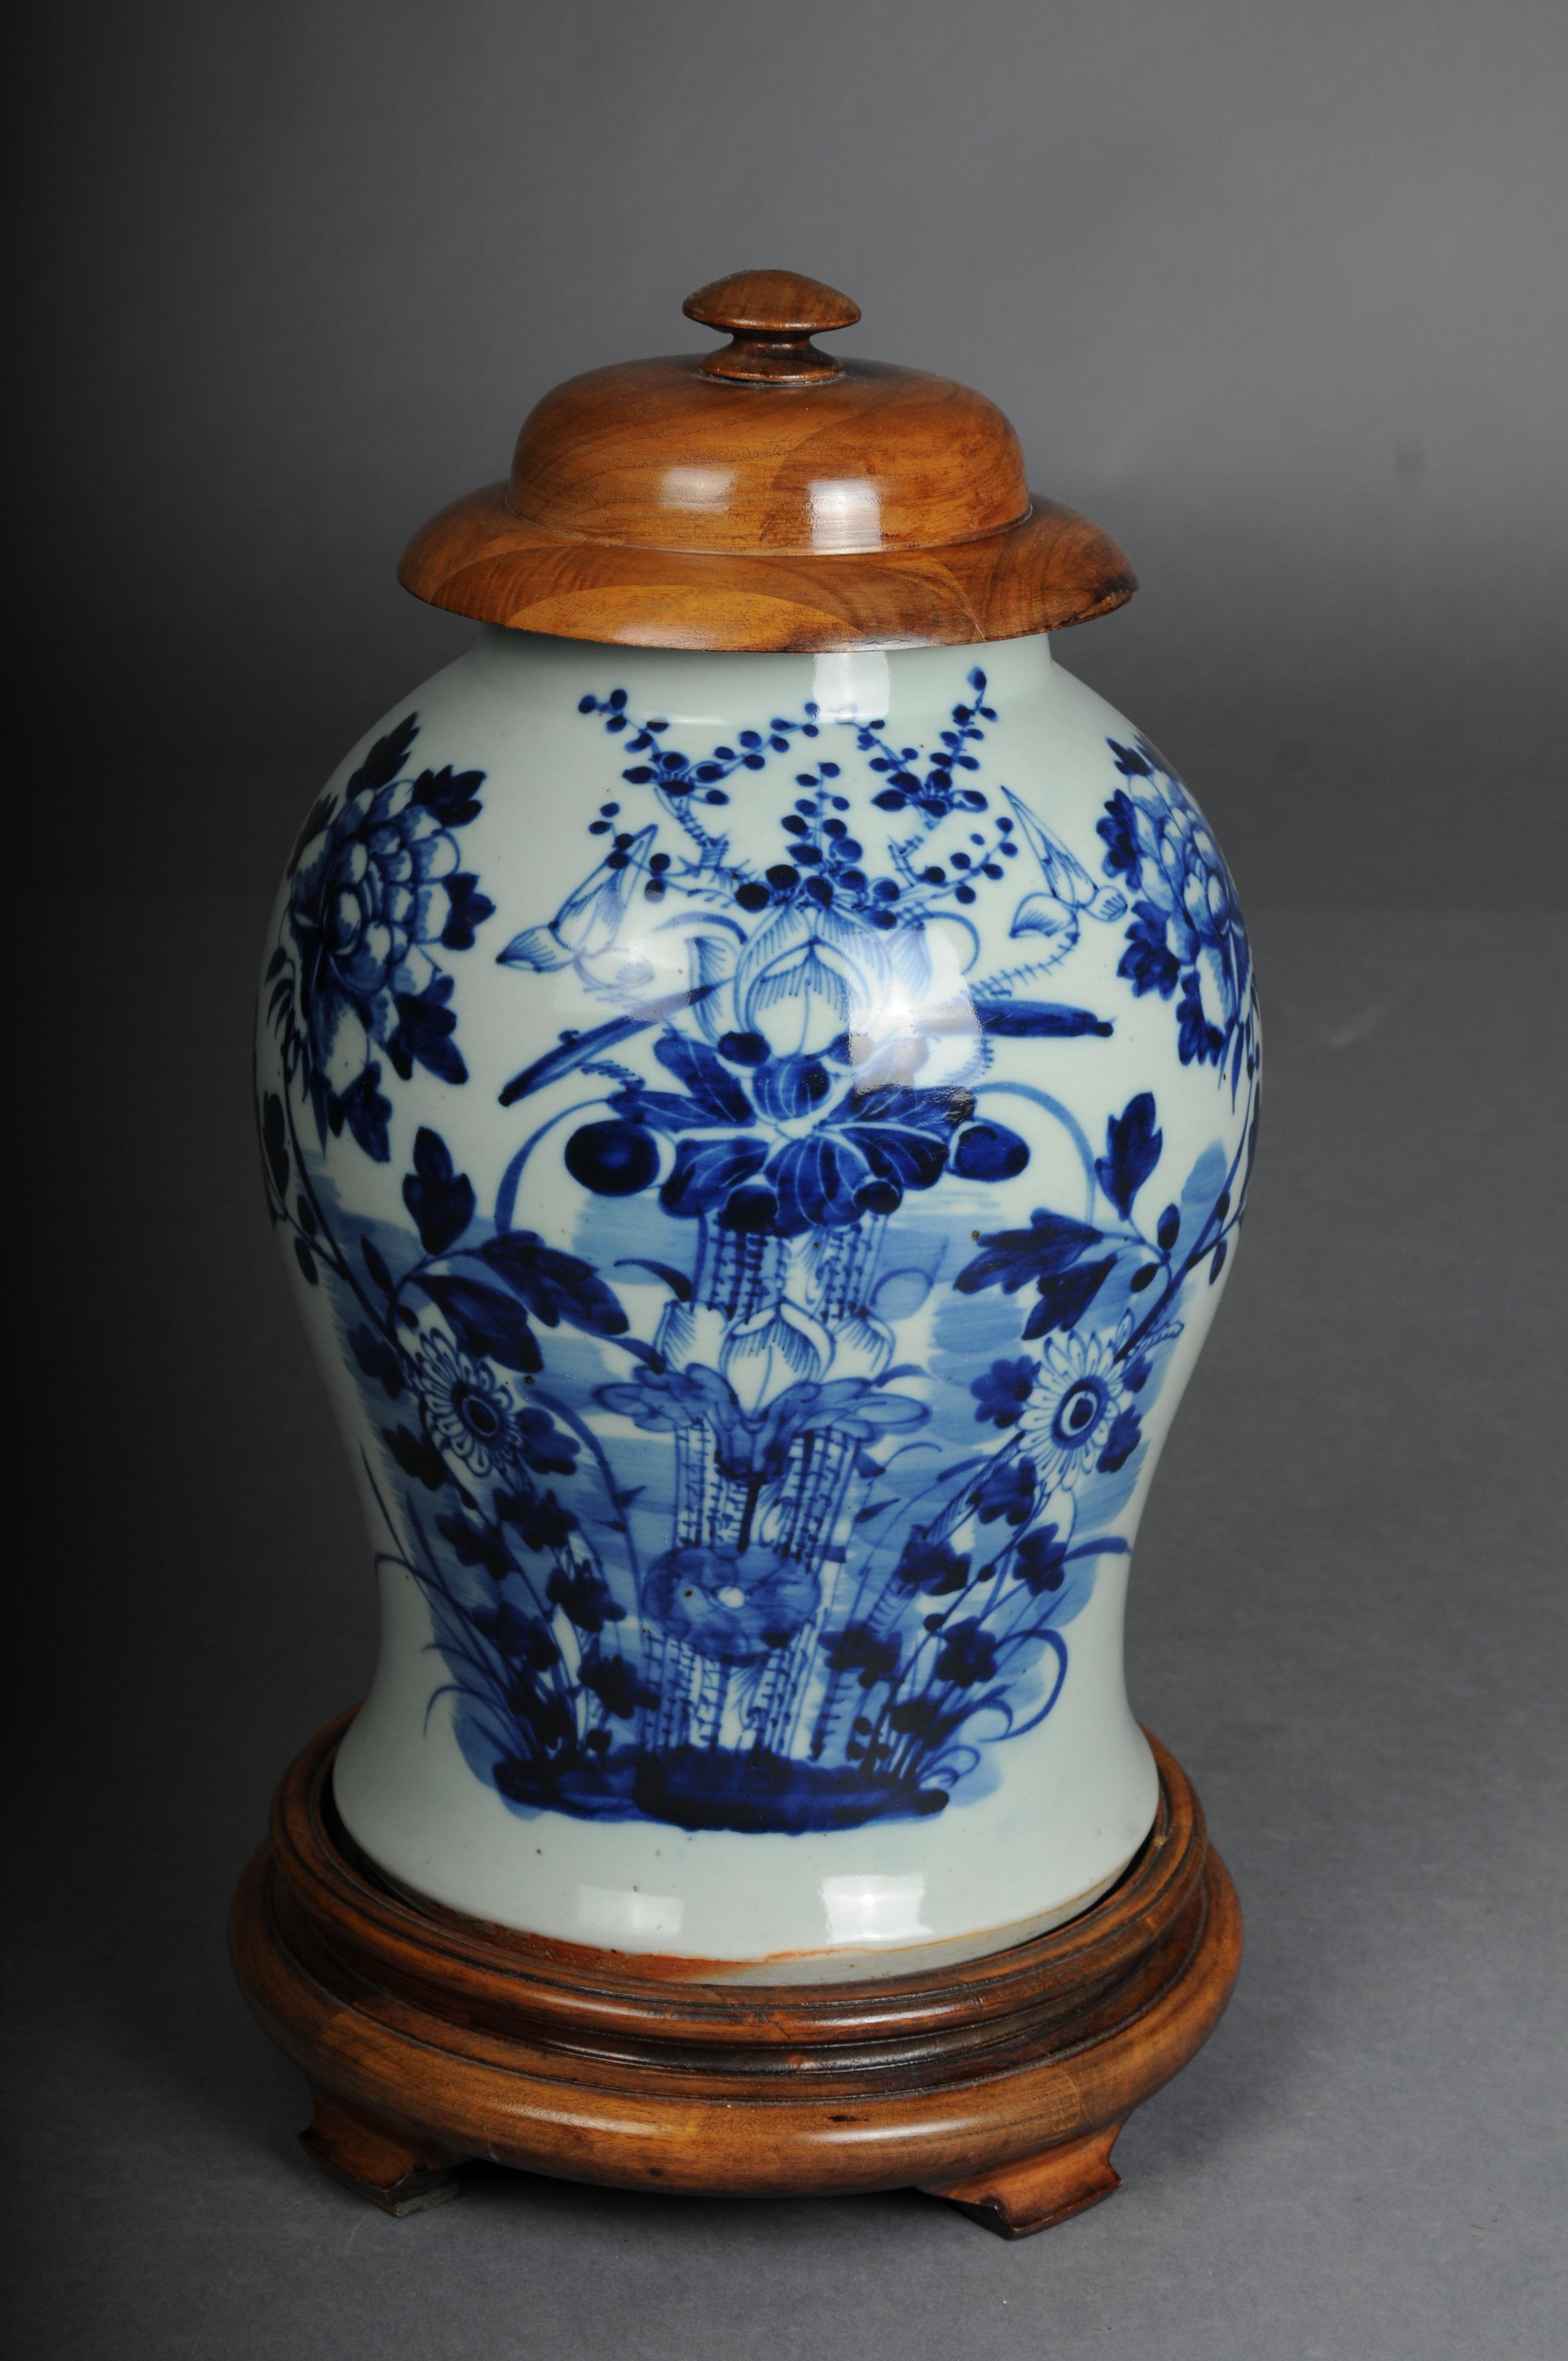 Large Asian table vase, porcelain, 20th century.


Porcelain, blue painting with flowers and leaves (garden view). Vase with a curved wooden lid crowned with a knob. The pedestal is also made of wood.
A very beautiful and old piece of porcelain with